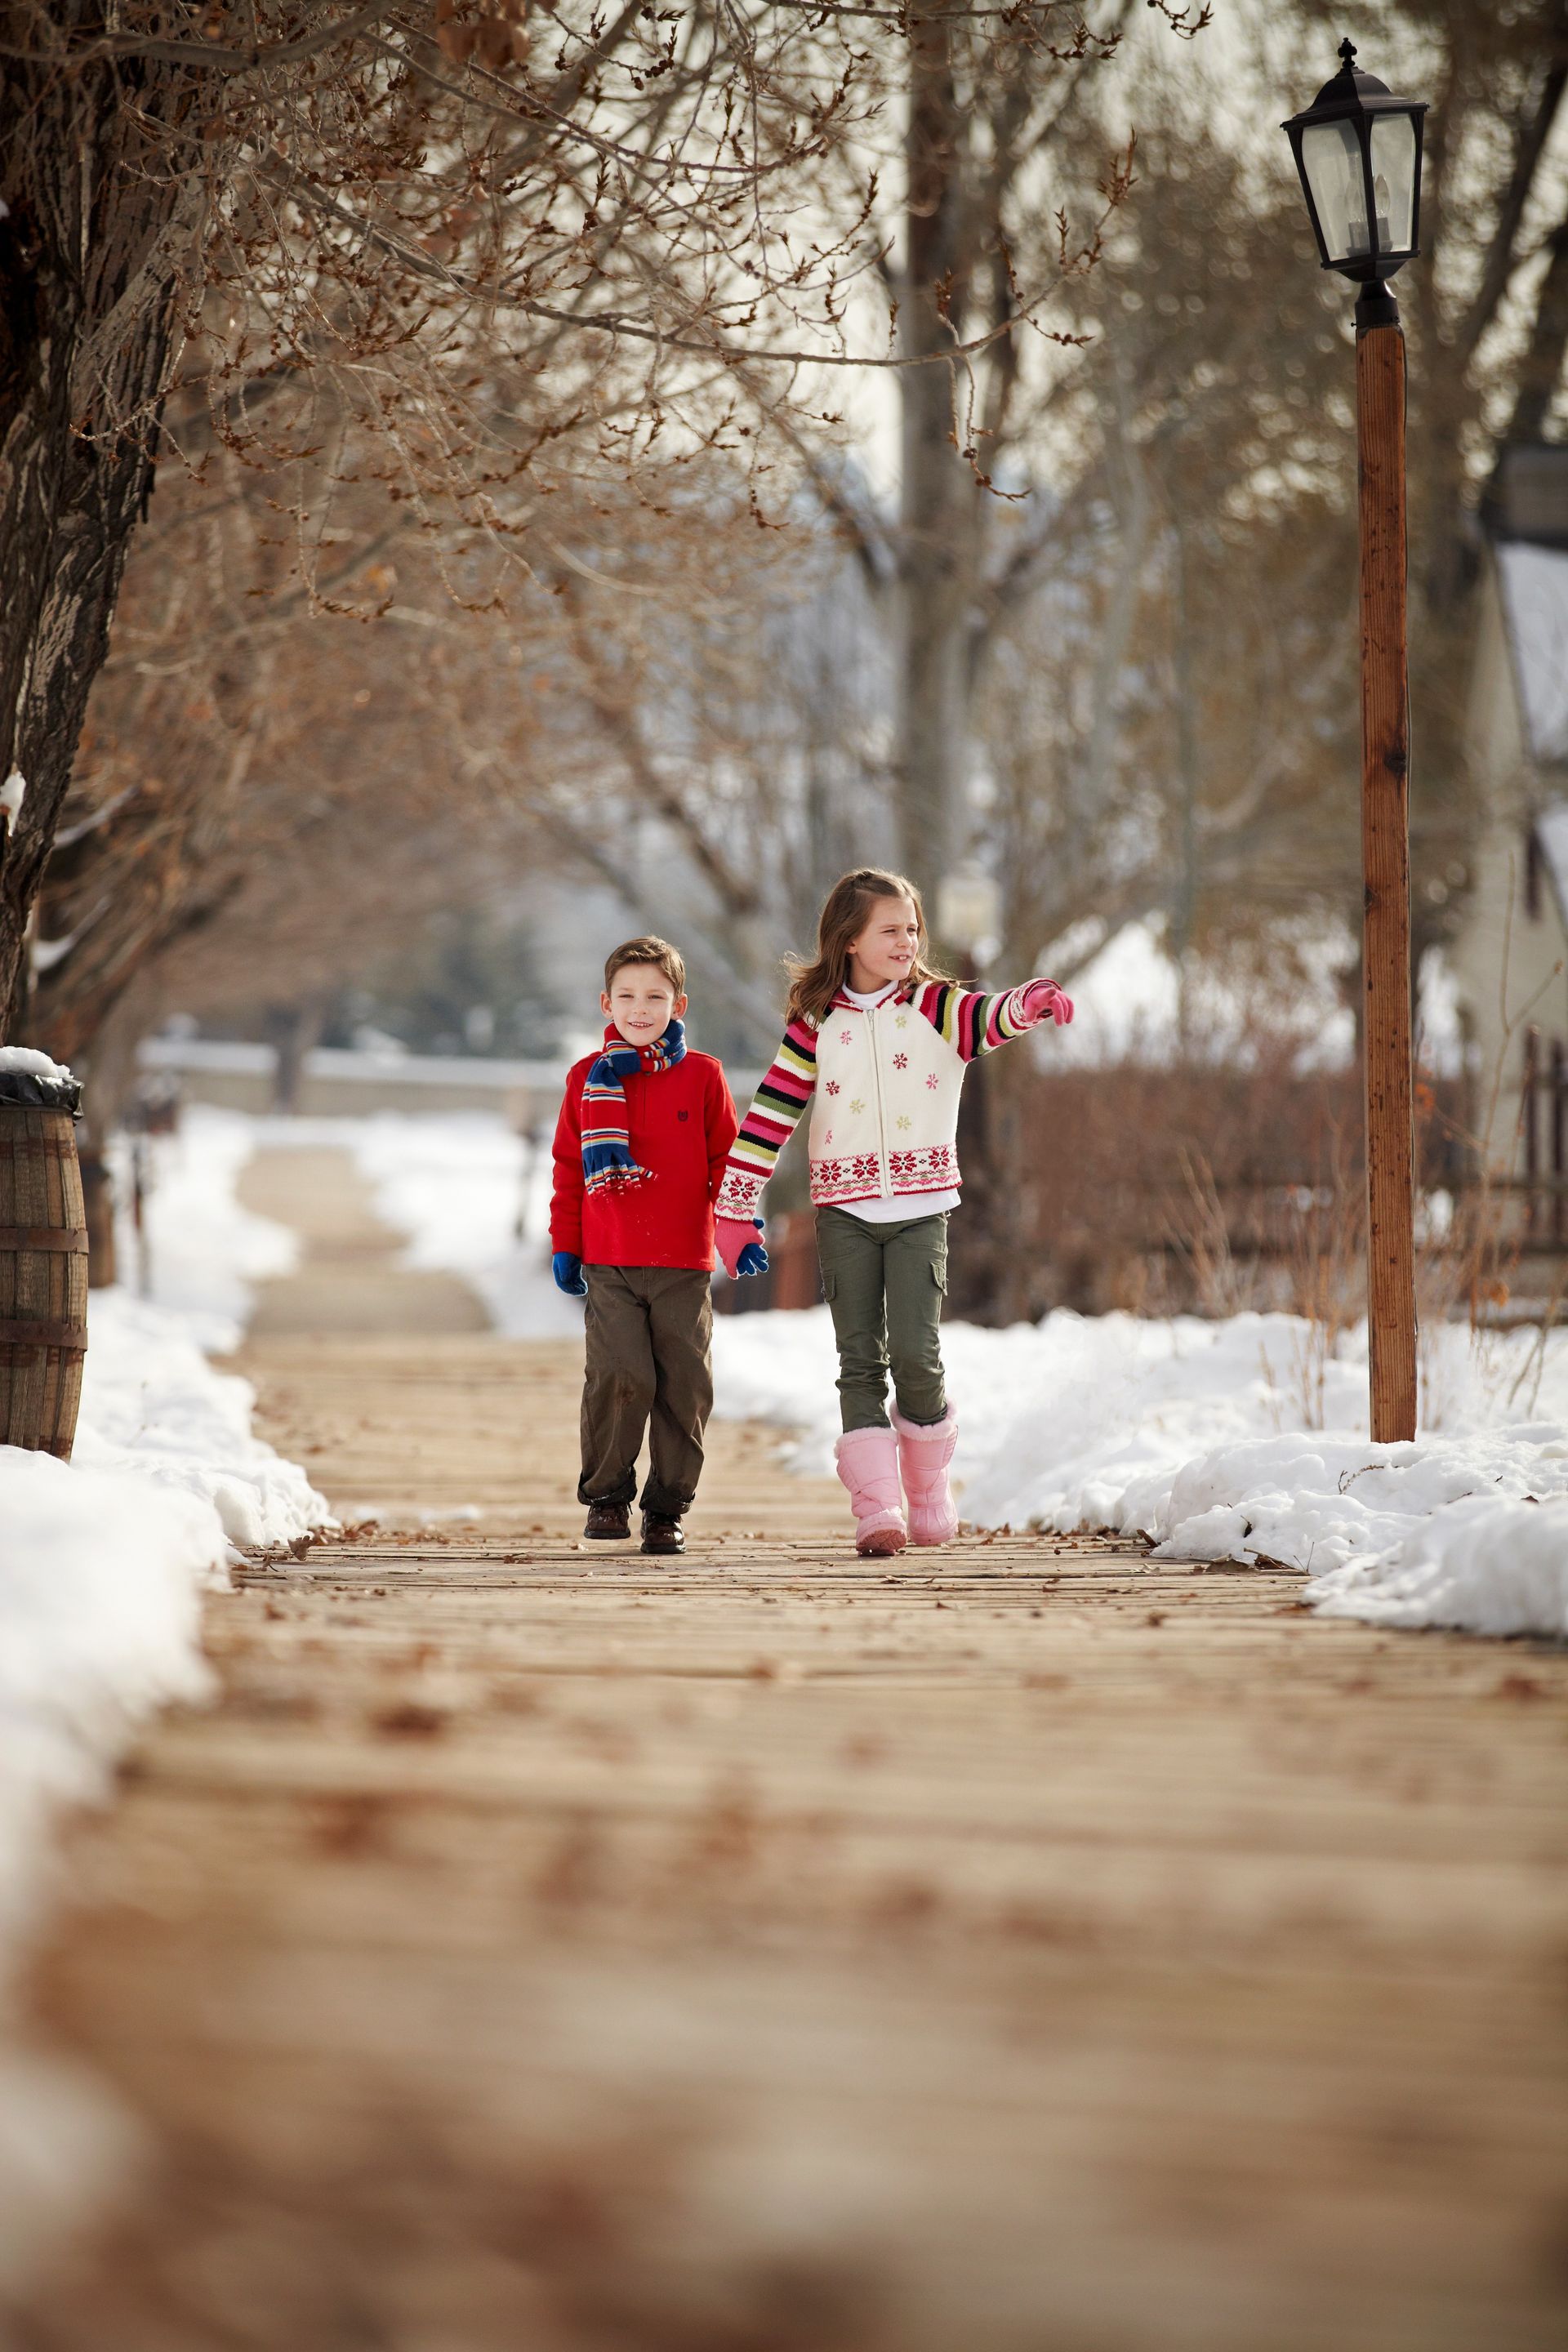 A brother and sister go for a walk, with snow on the ground.